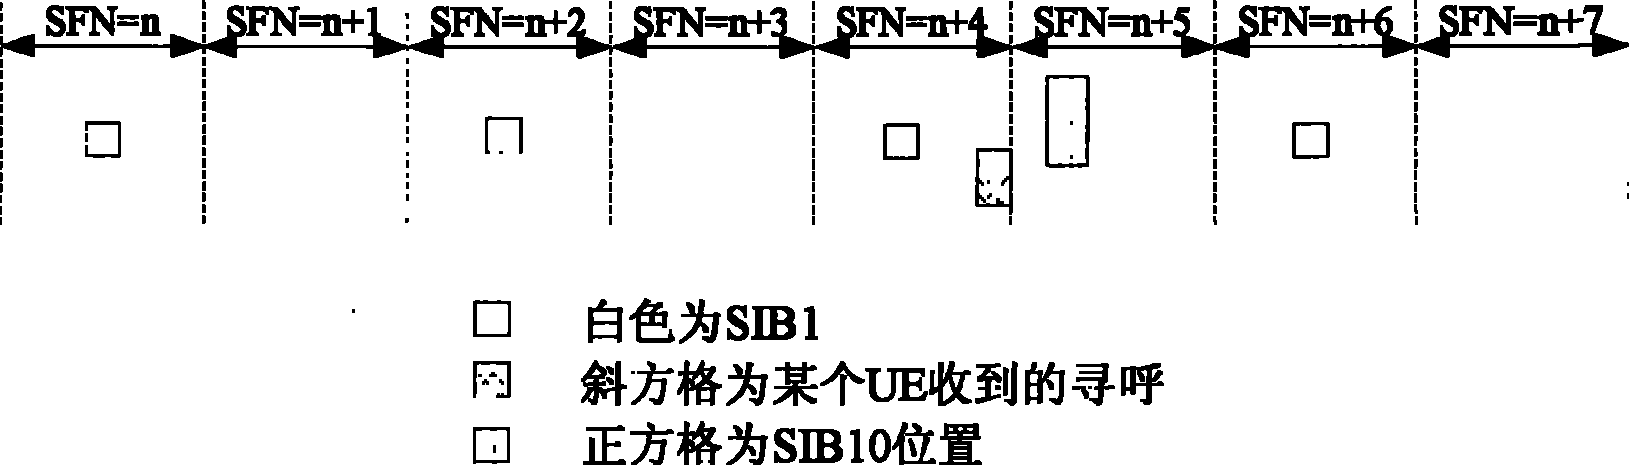 System message receiving and transmitting method of earthquake